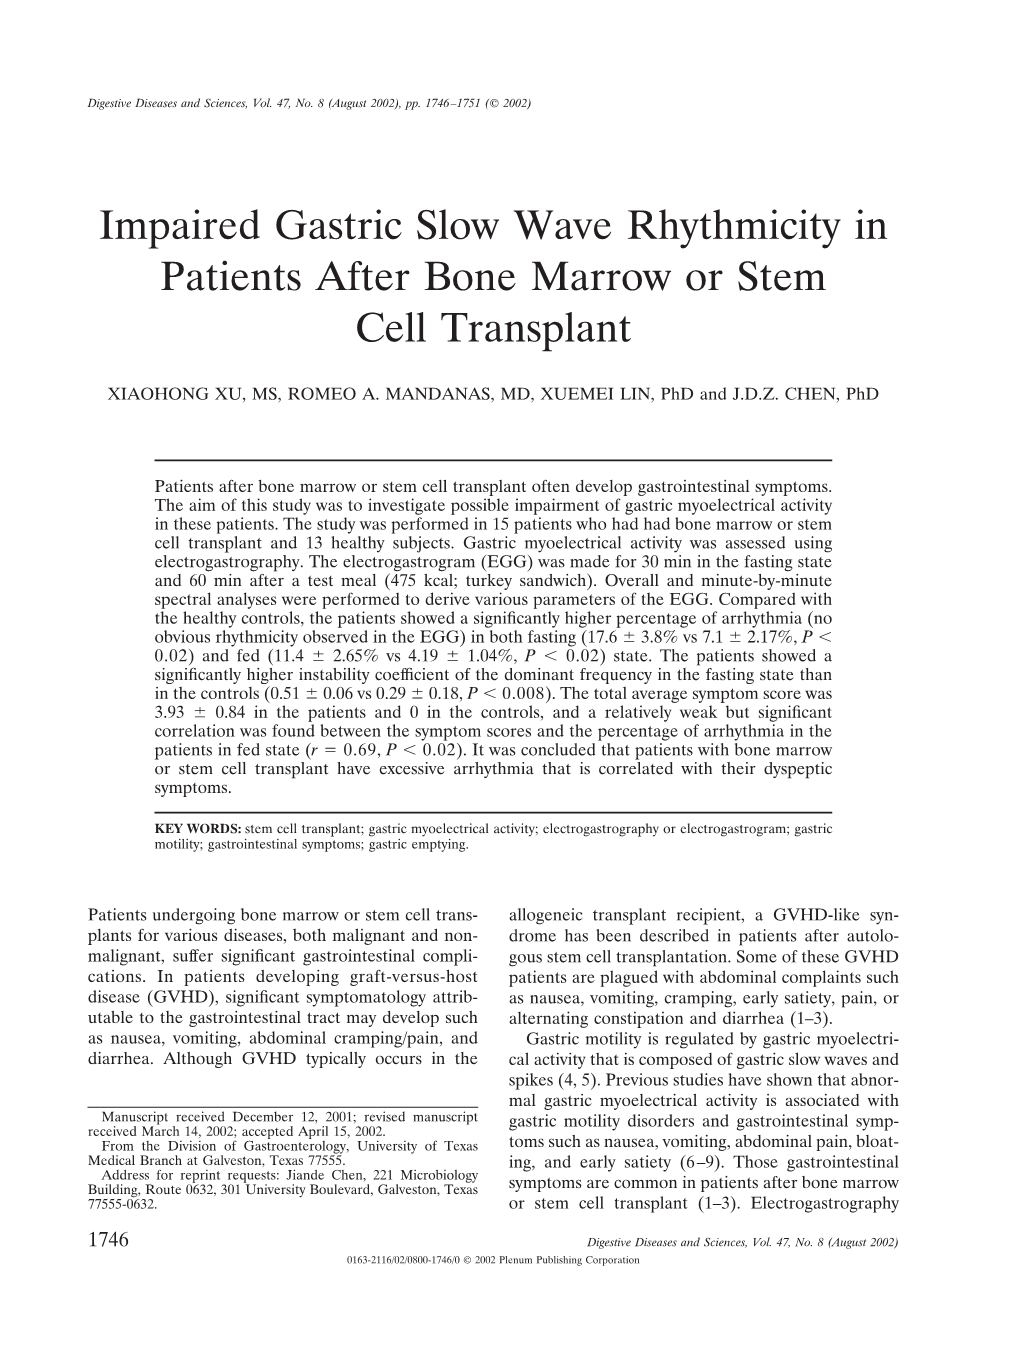 Impaired Gastric Slow Wave Rhythmicity in Patients After Bone Marrow Or Stem Cell Transplant